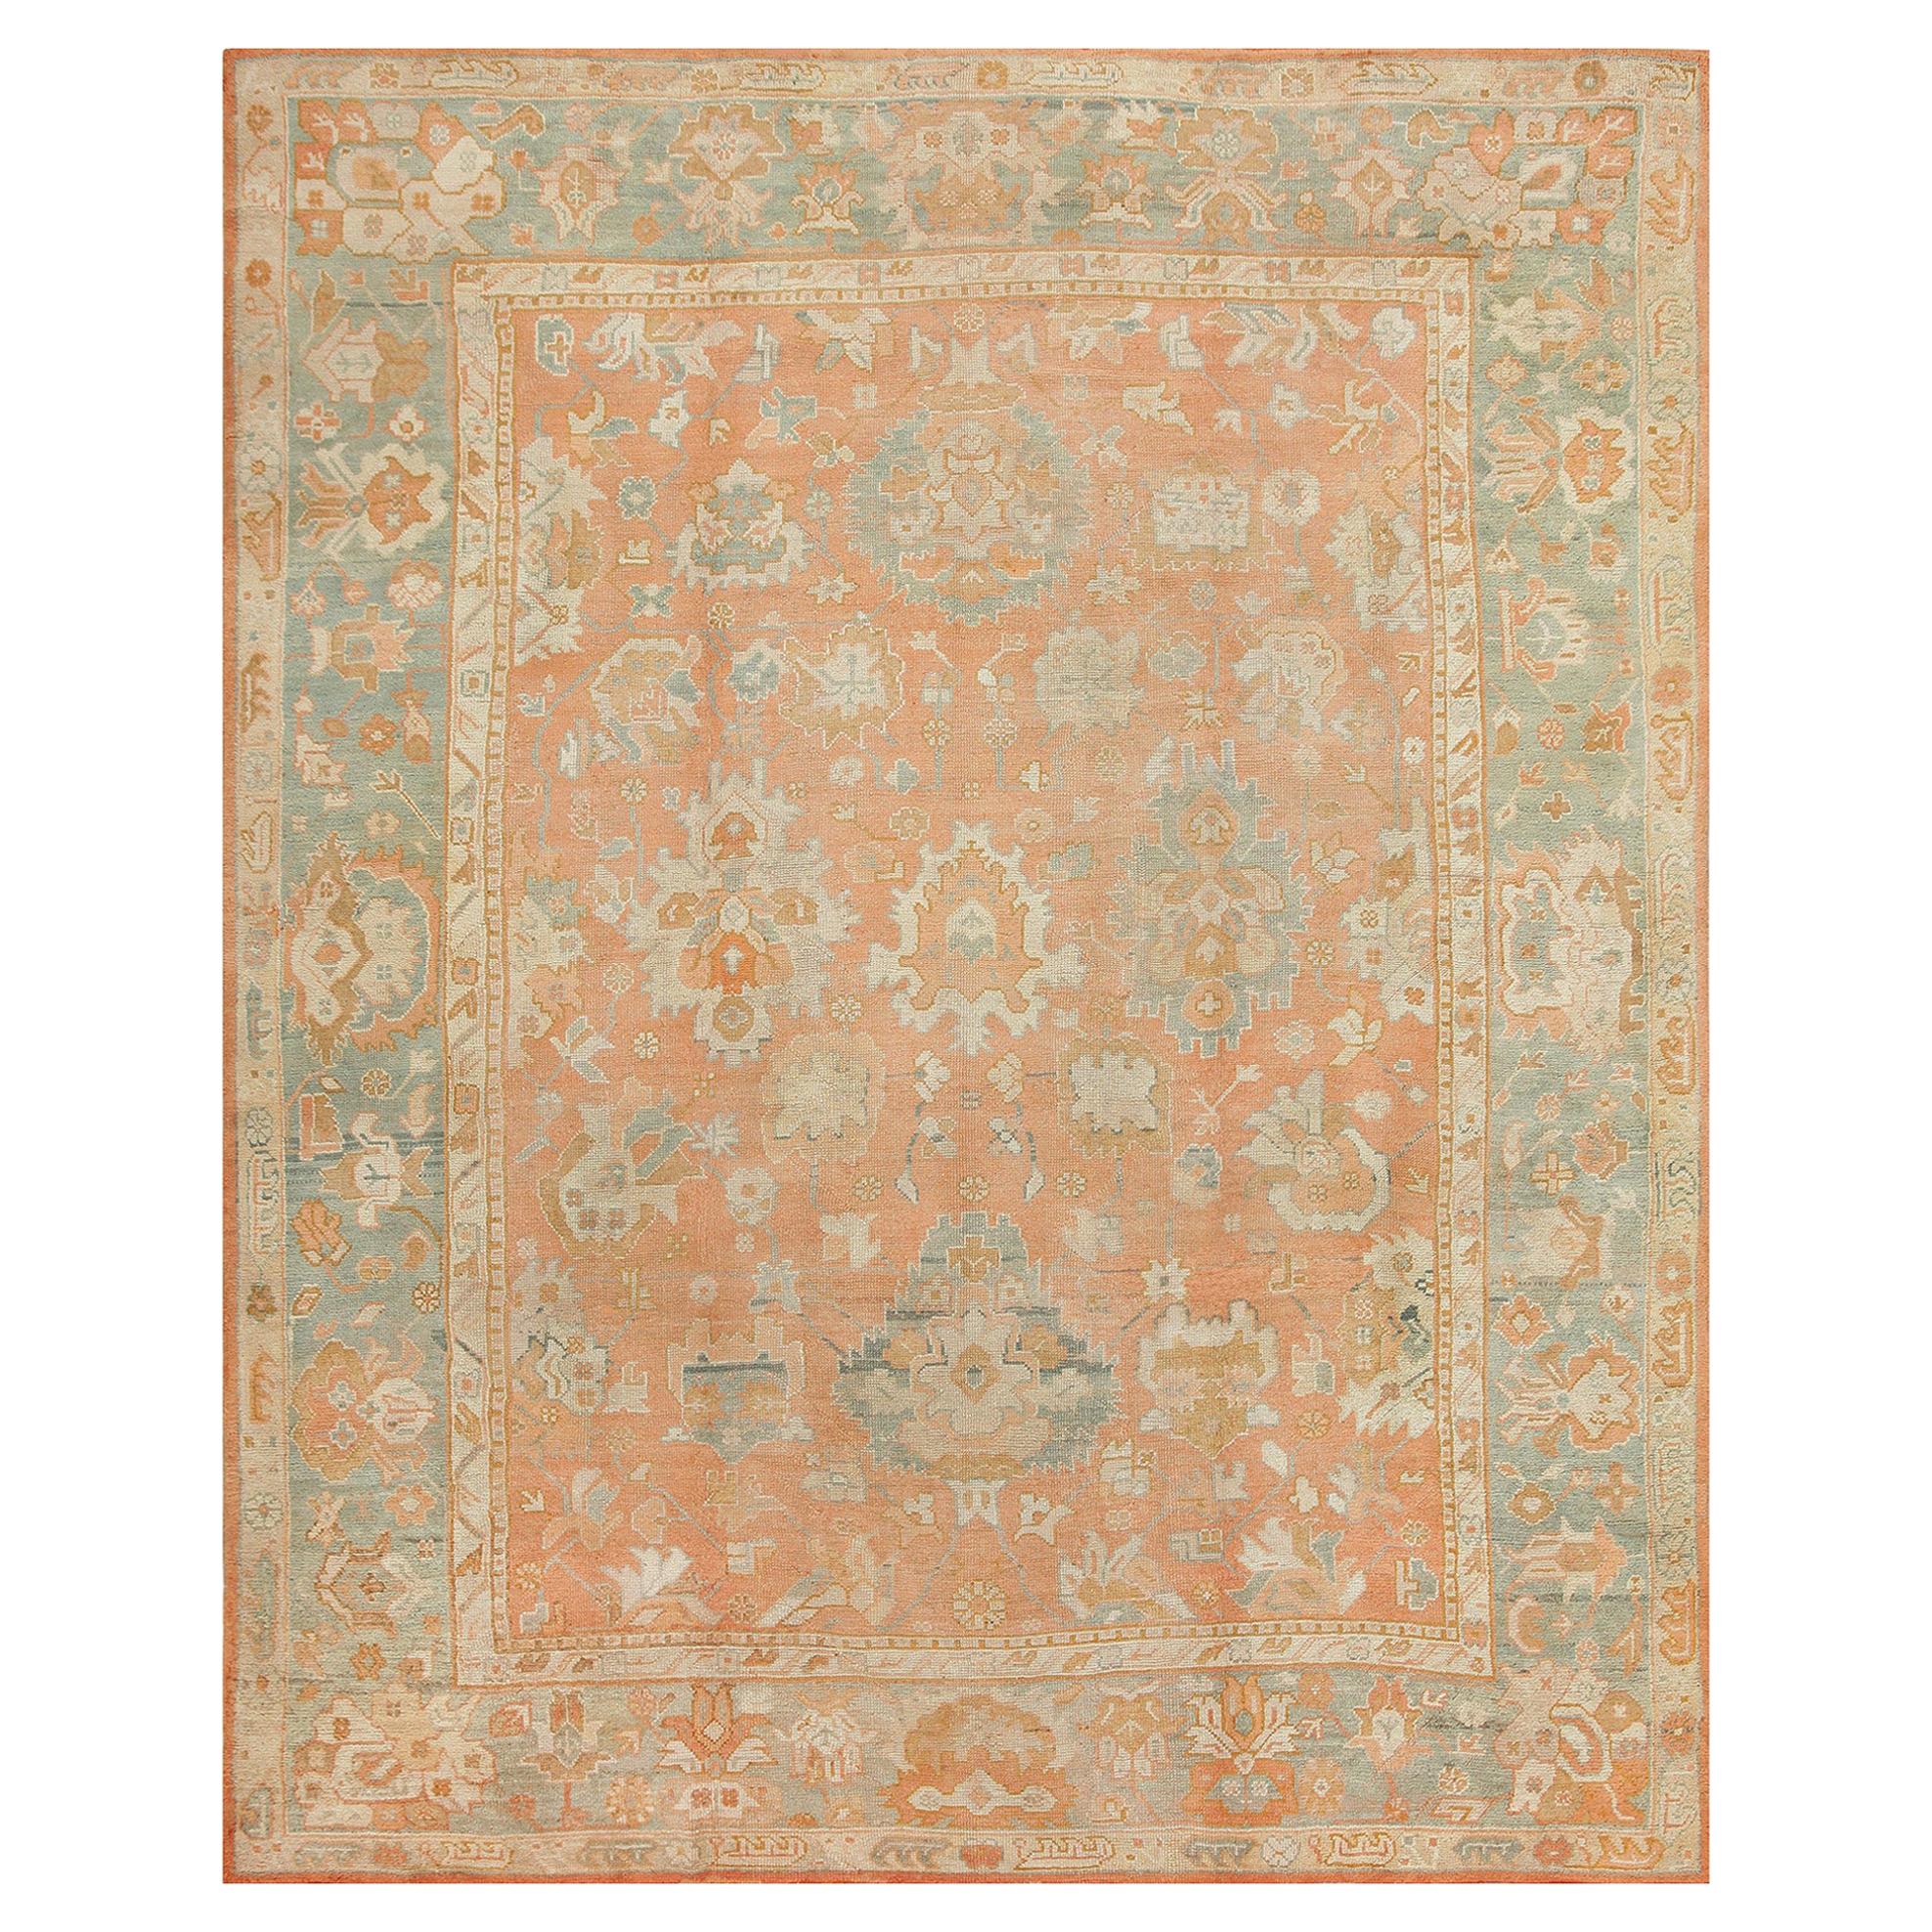 Nazmiyal Collection Antique Turkish Oushak Rug. Size: 11 ft 7 in x 14 ft 7 in